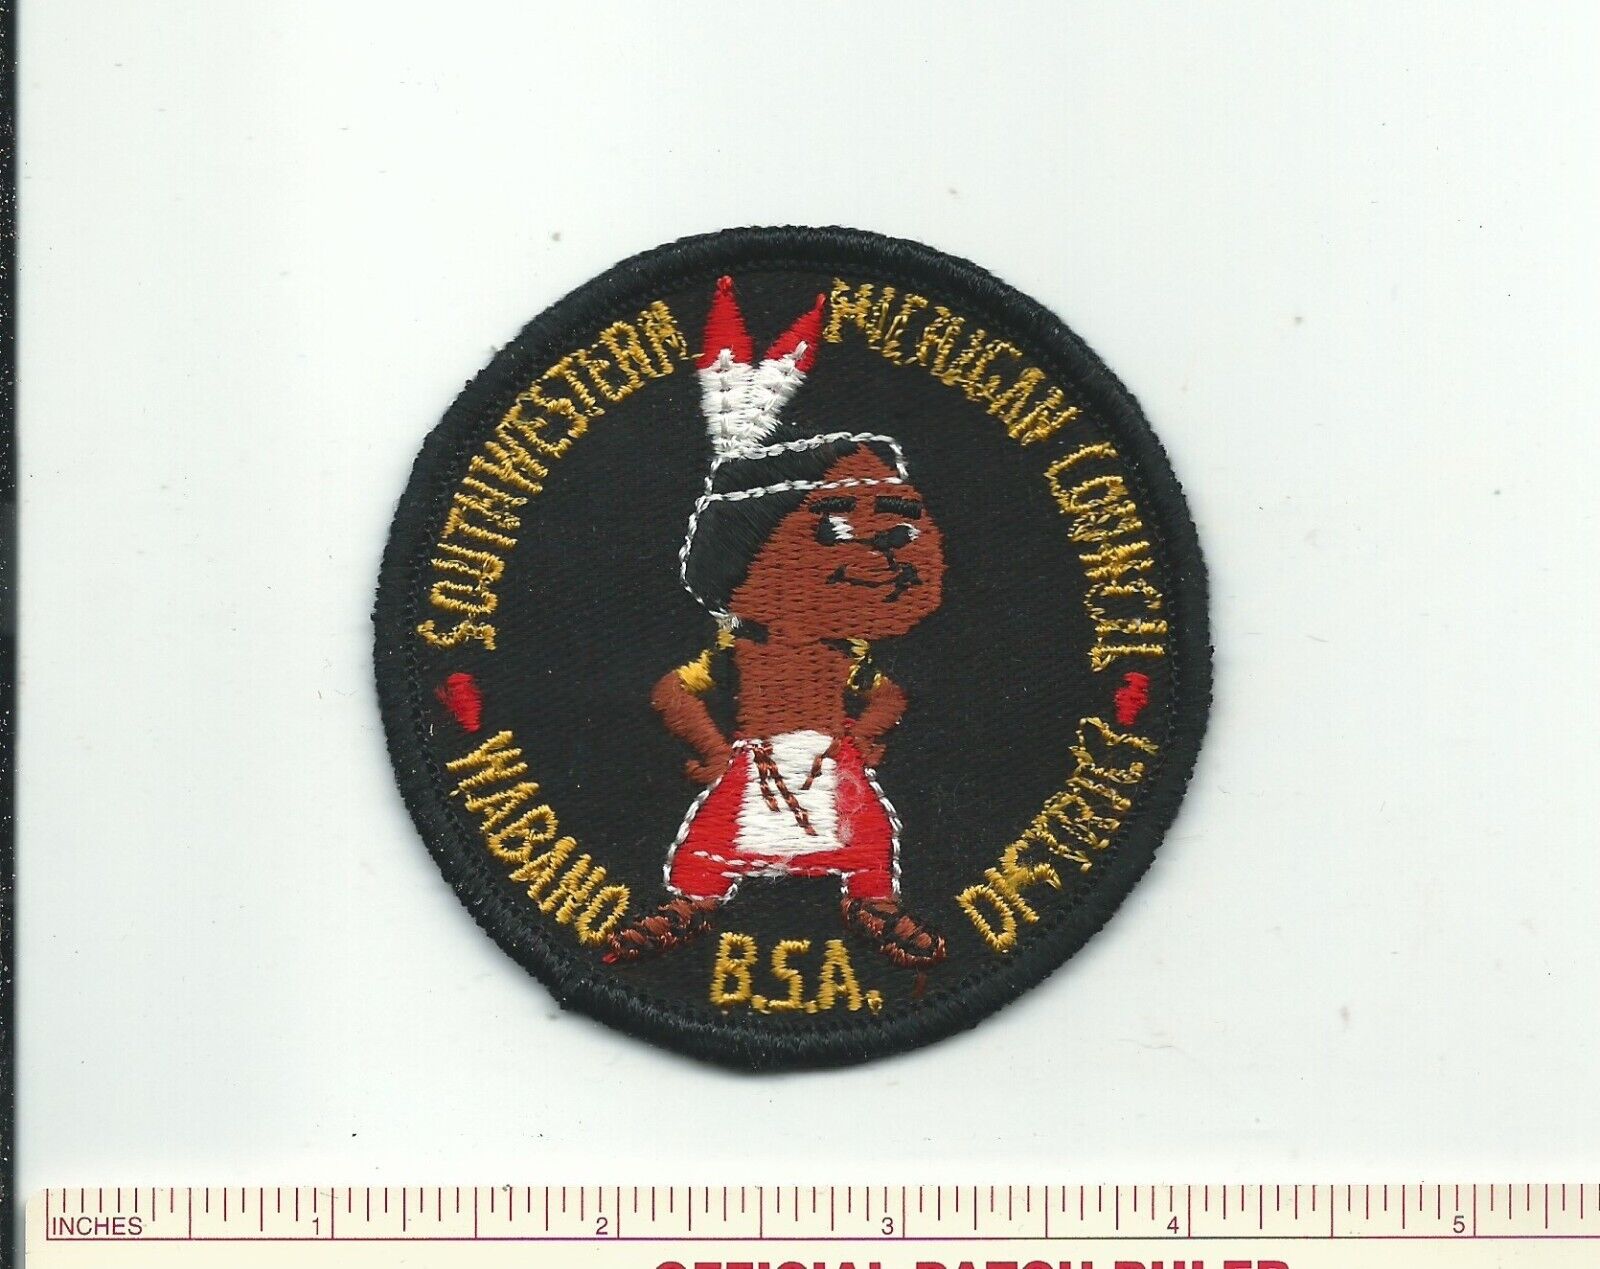 DL SCOUT BSA SOUTHWESTERN MICHIGAN COUNCIL WABANO DISTRICT MERGED PATCH MI BADGE